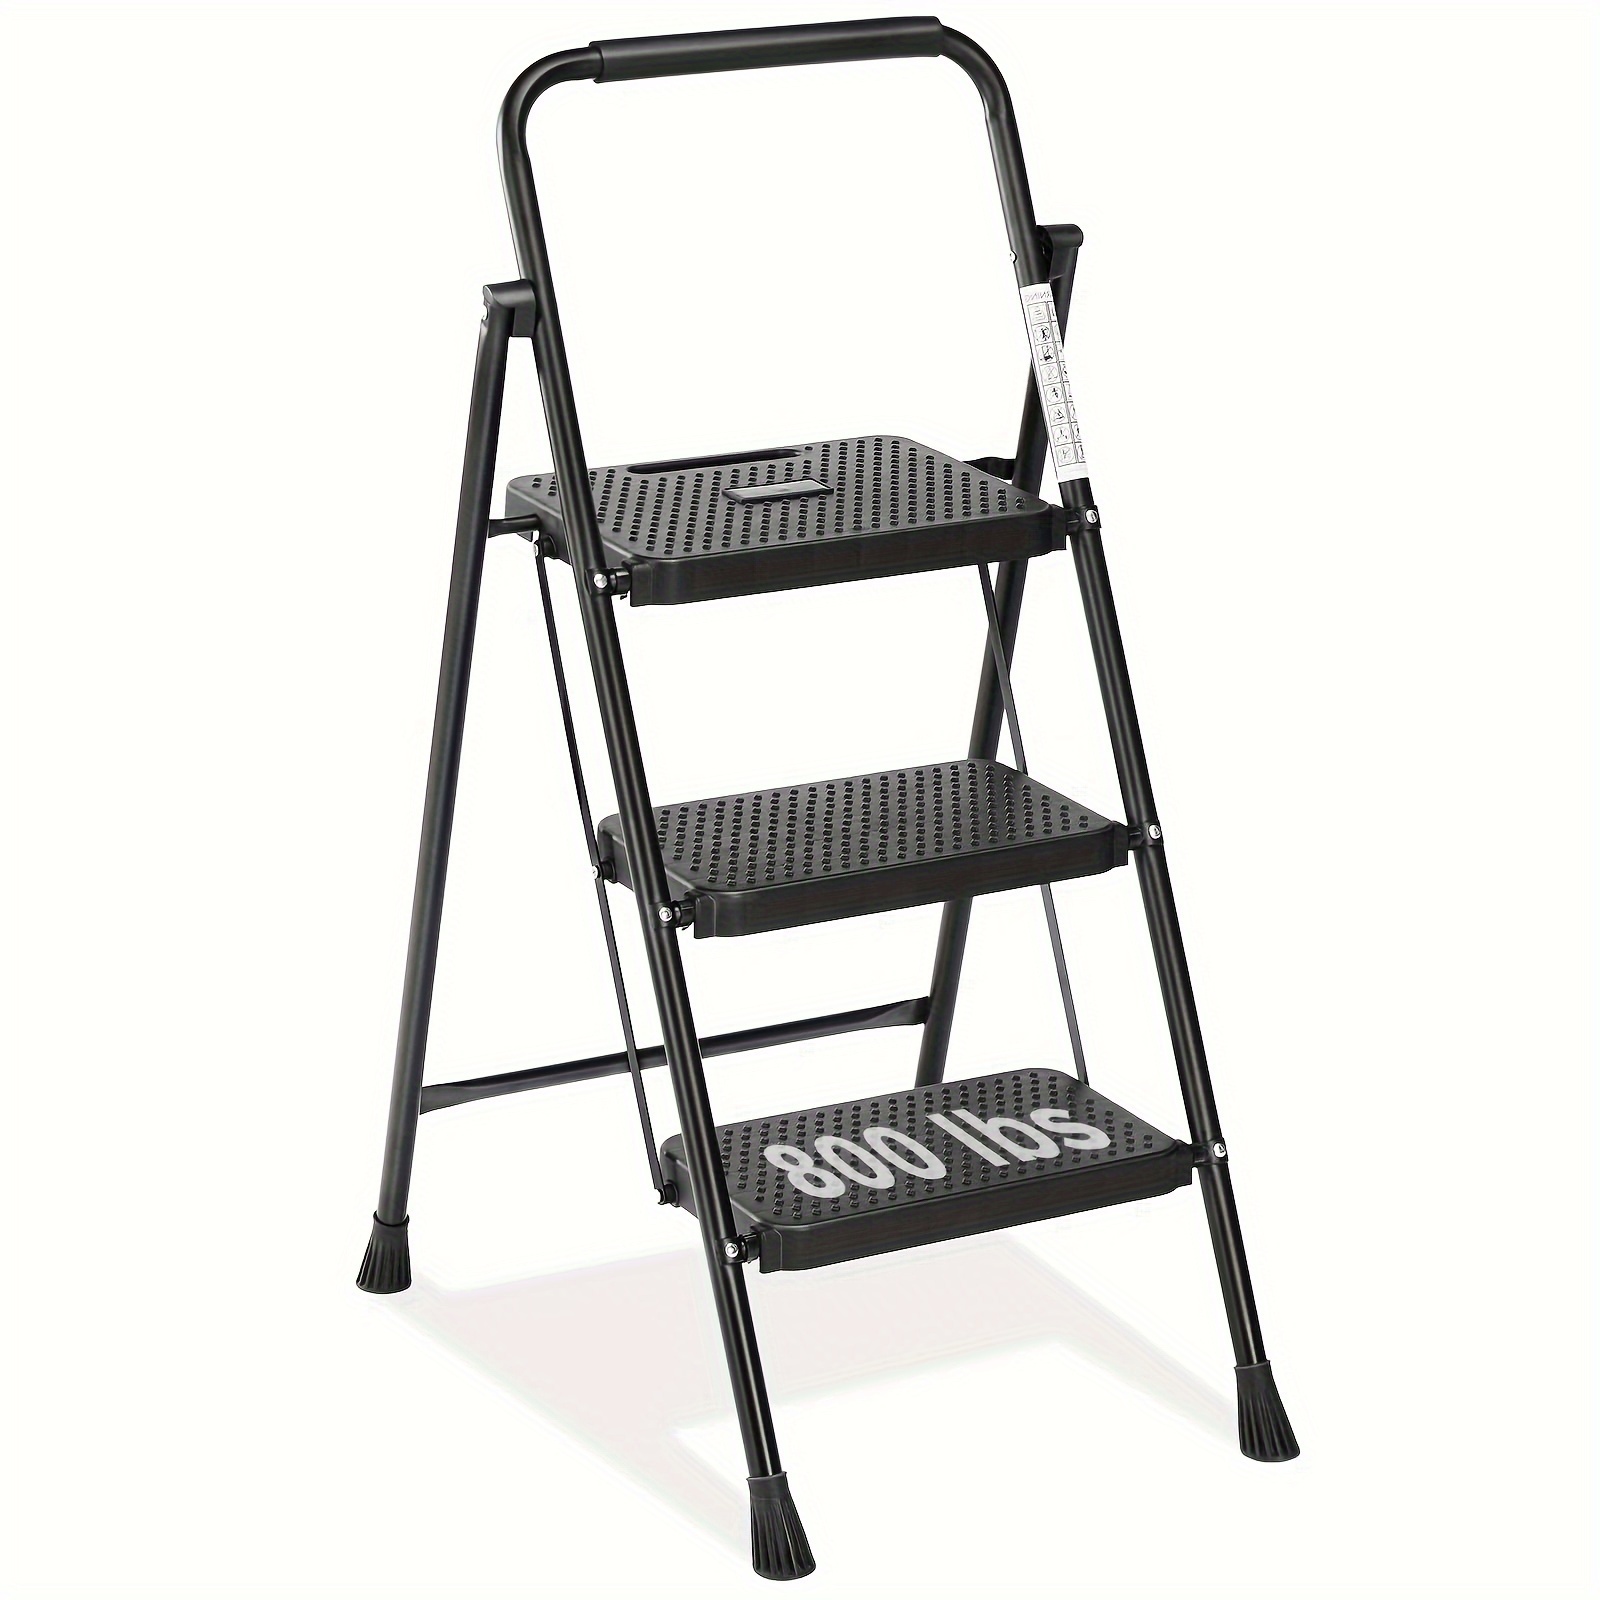 

Smug 3 Step Ladder, Folding Step Stool With Wide Anti-slip Pedal, 800lbs Sturdy Portable Ladder, Cushioned Handle, Lightweight Step Stool For Home Kitchen And Outdoor